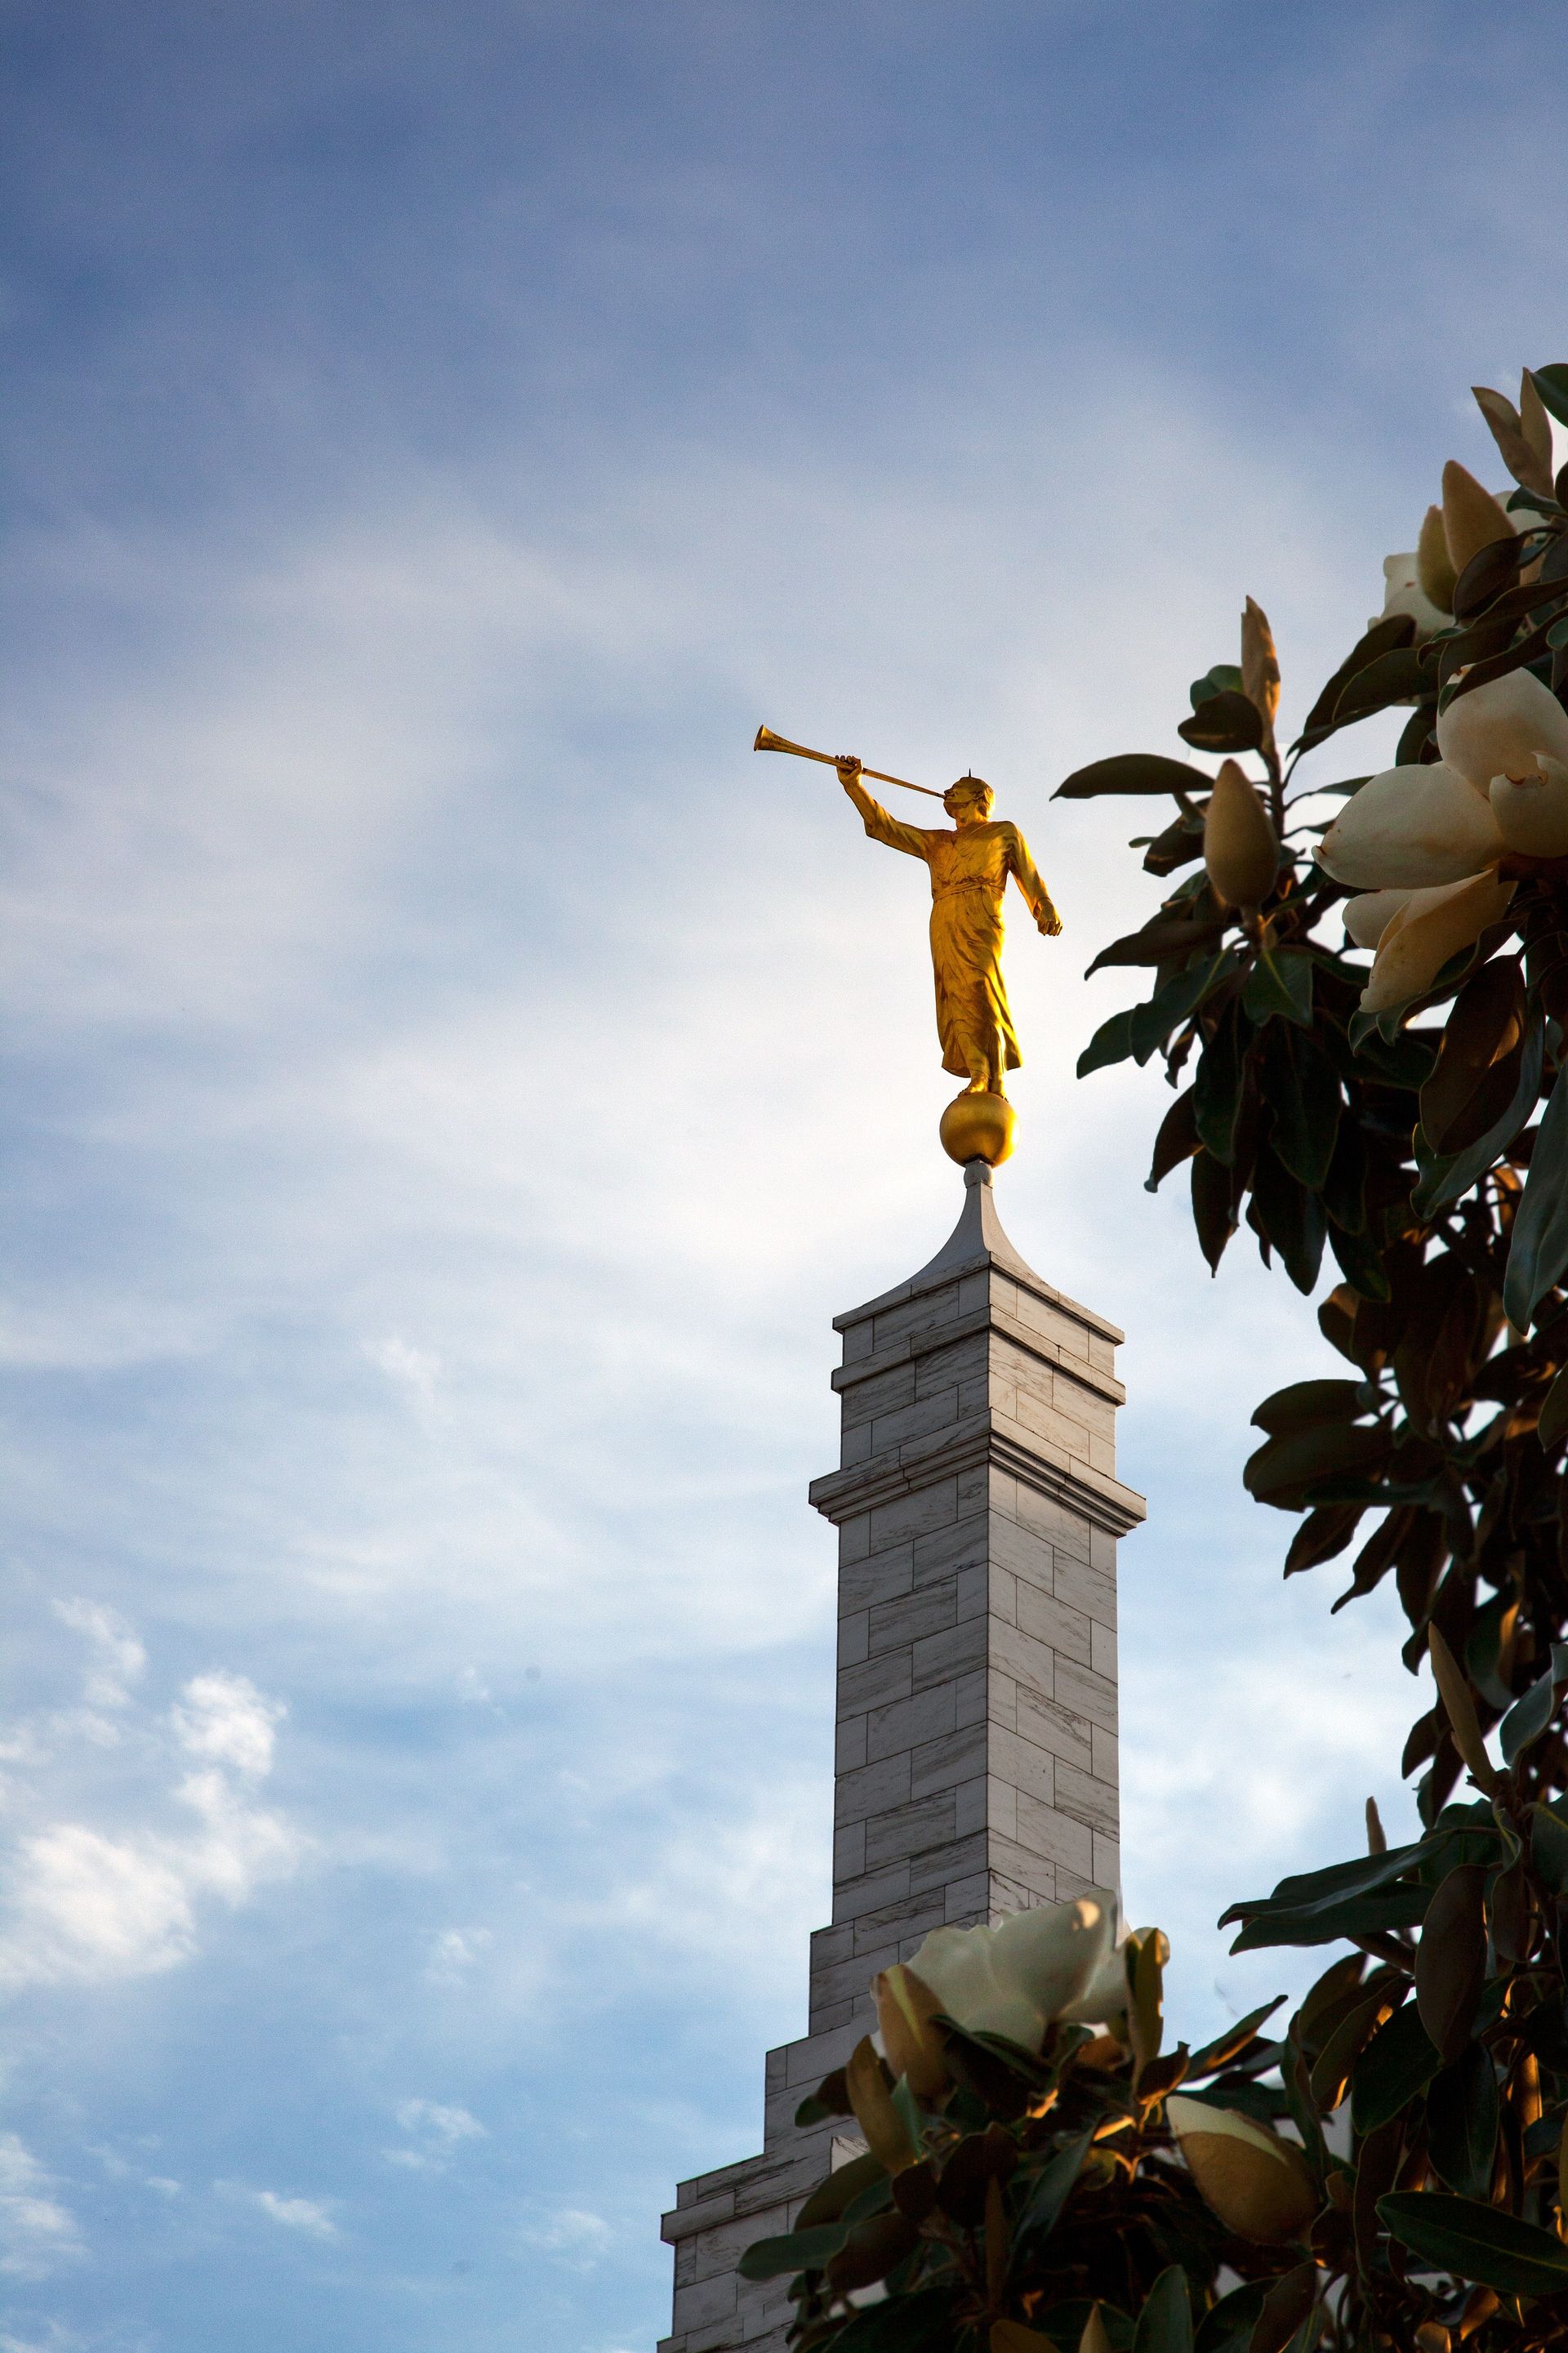 The spire and angel Moroni on the Memphis Tennessee Temple.